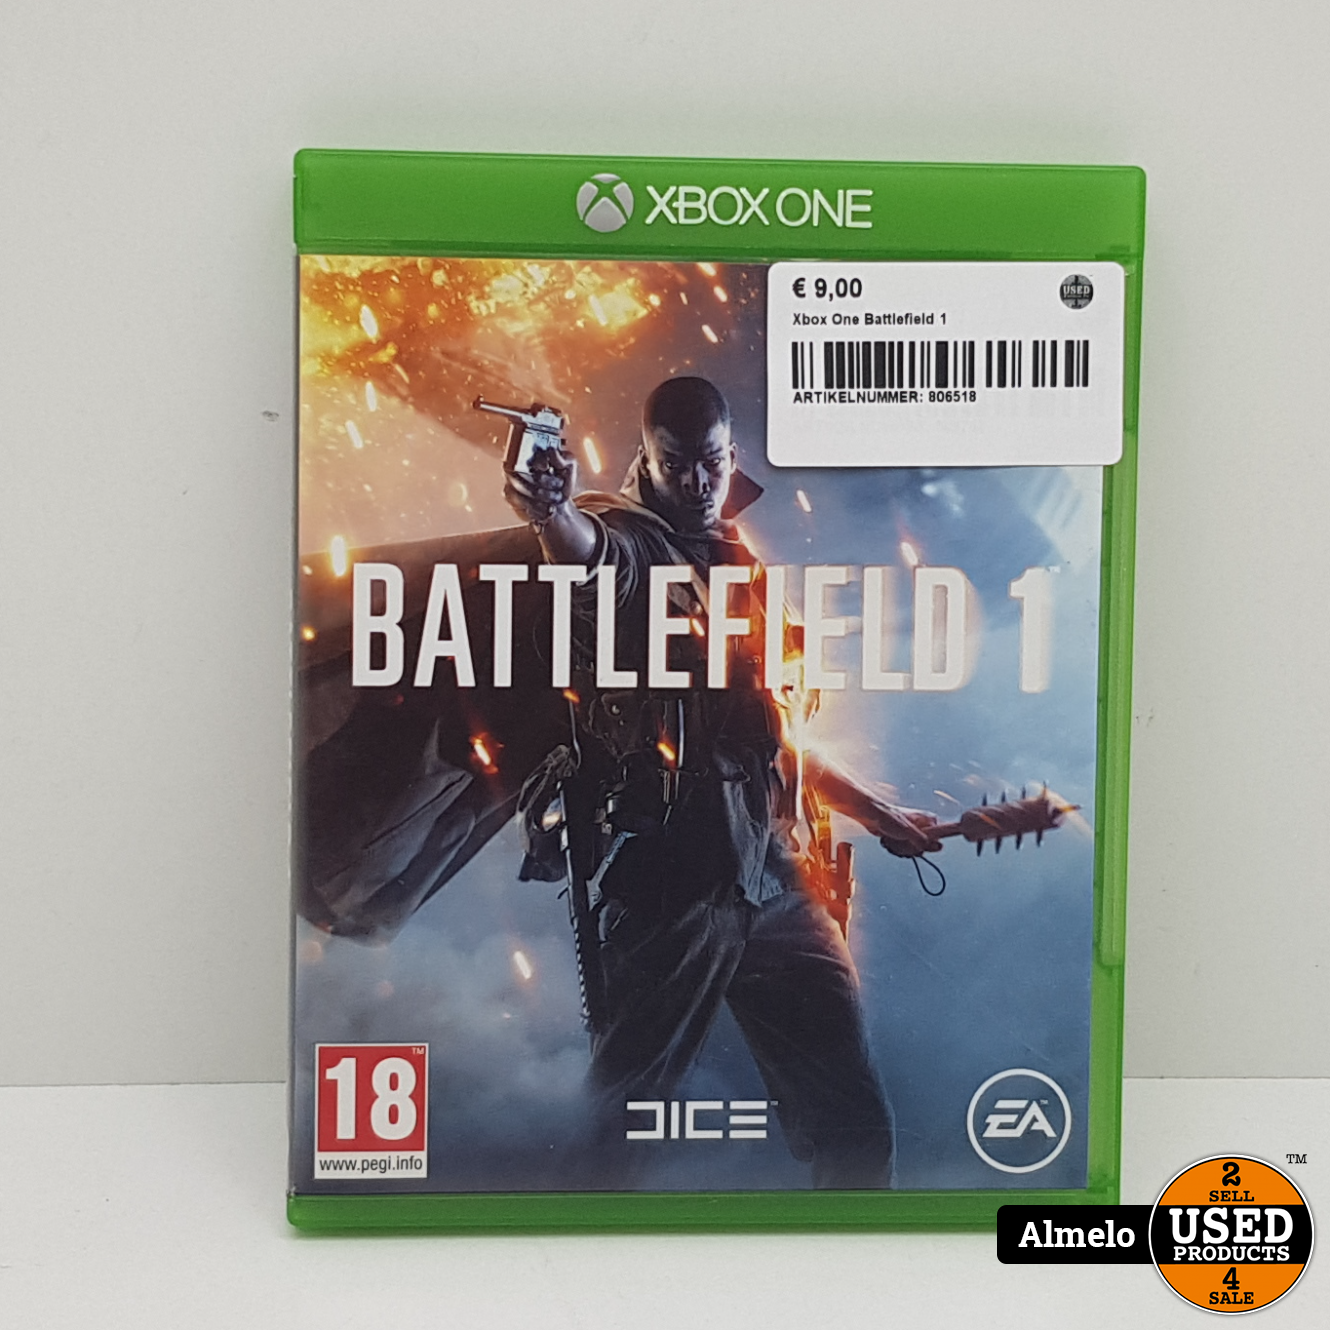 orkest streep Afwijzen Xbox One Battlefield 1 - Used Products Almelo